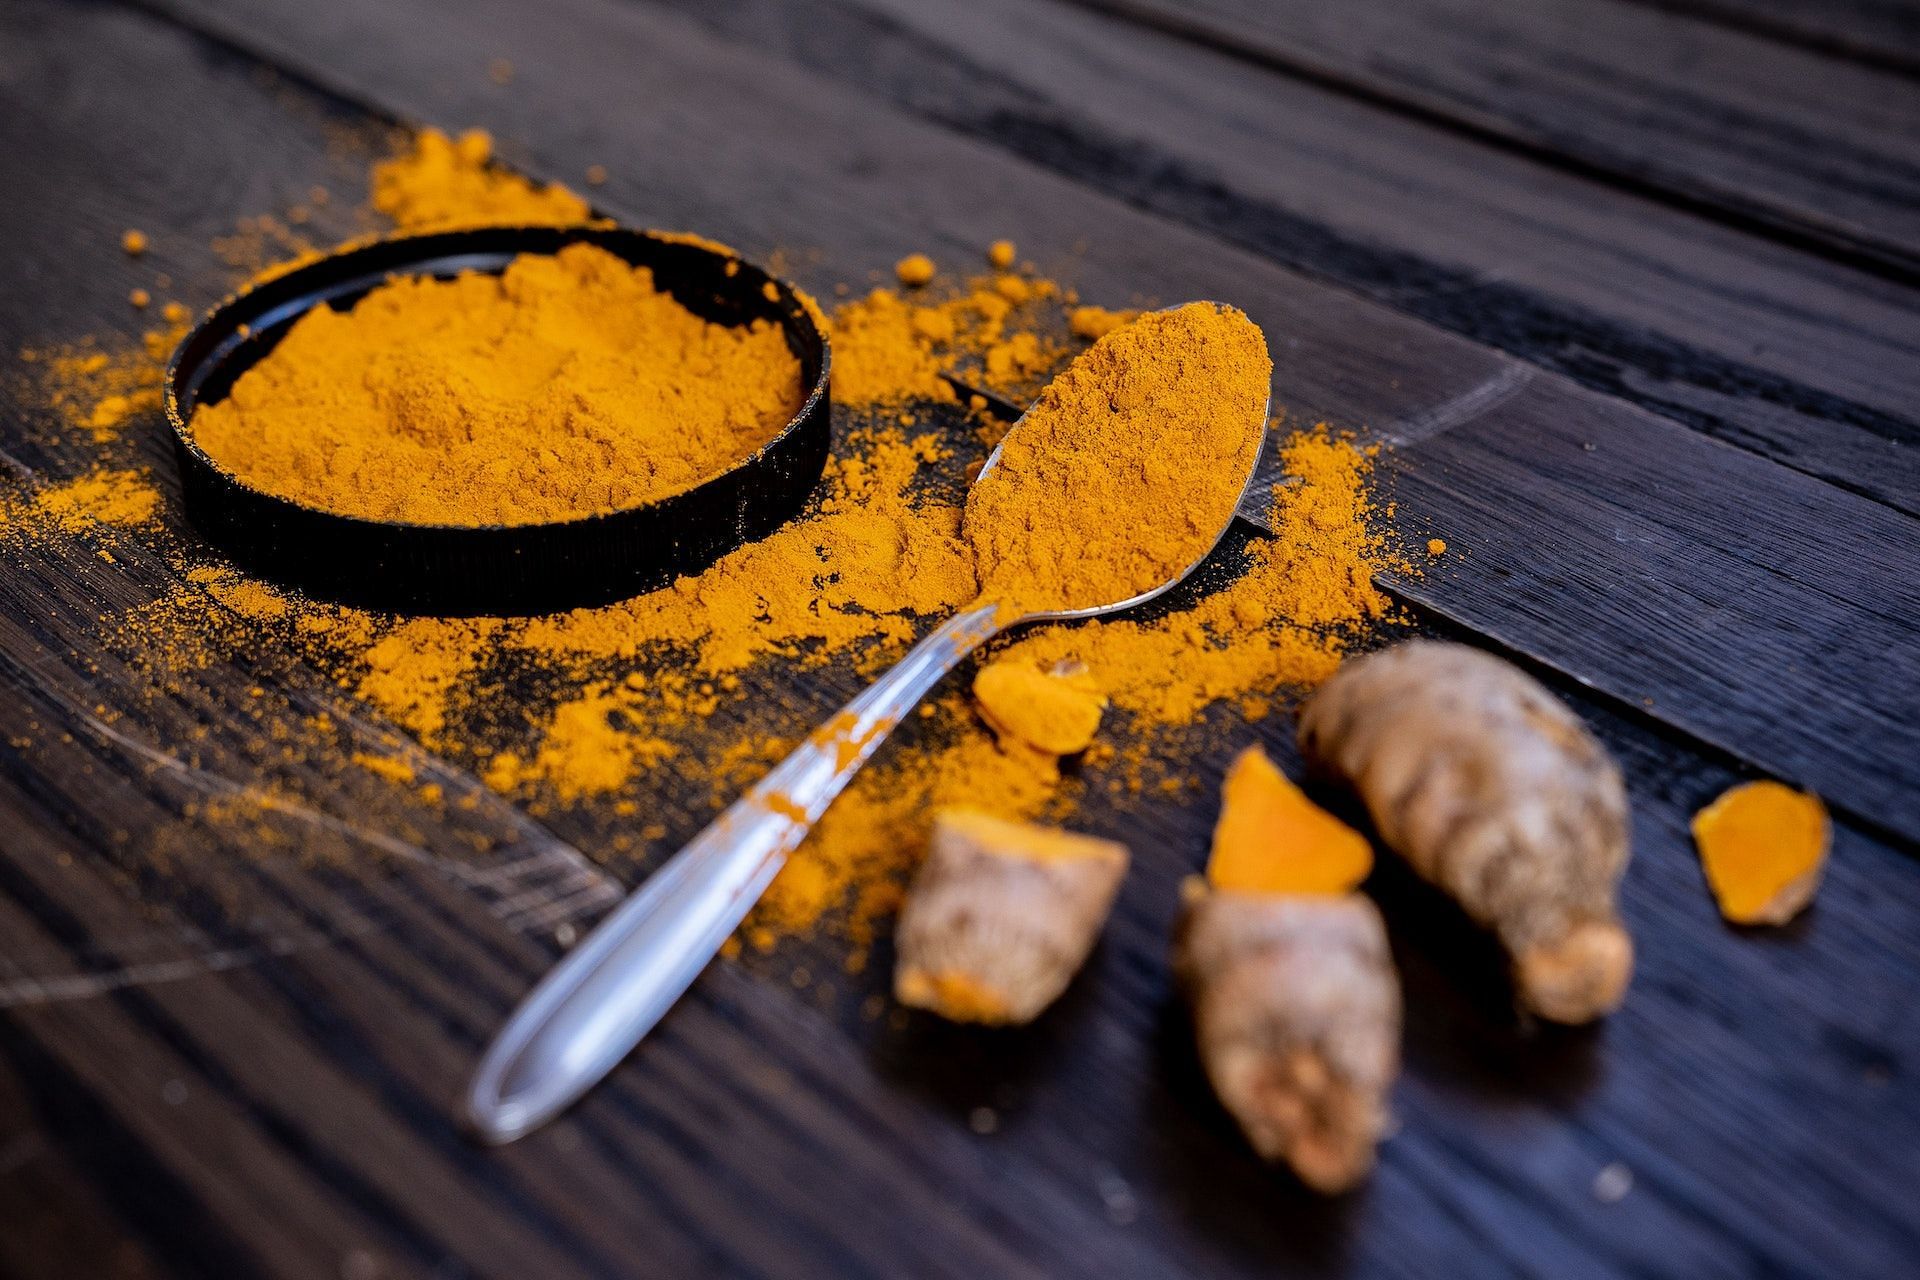 Turmeric can prevent the infection from spreading. (Photo via Pexels/Karl Solano)